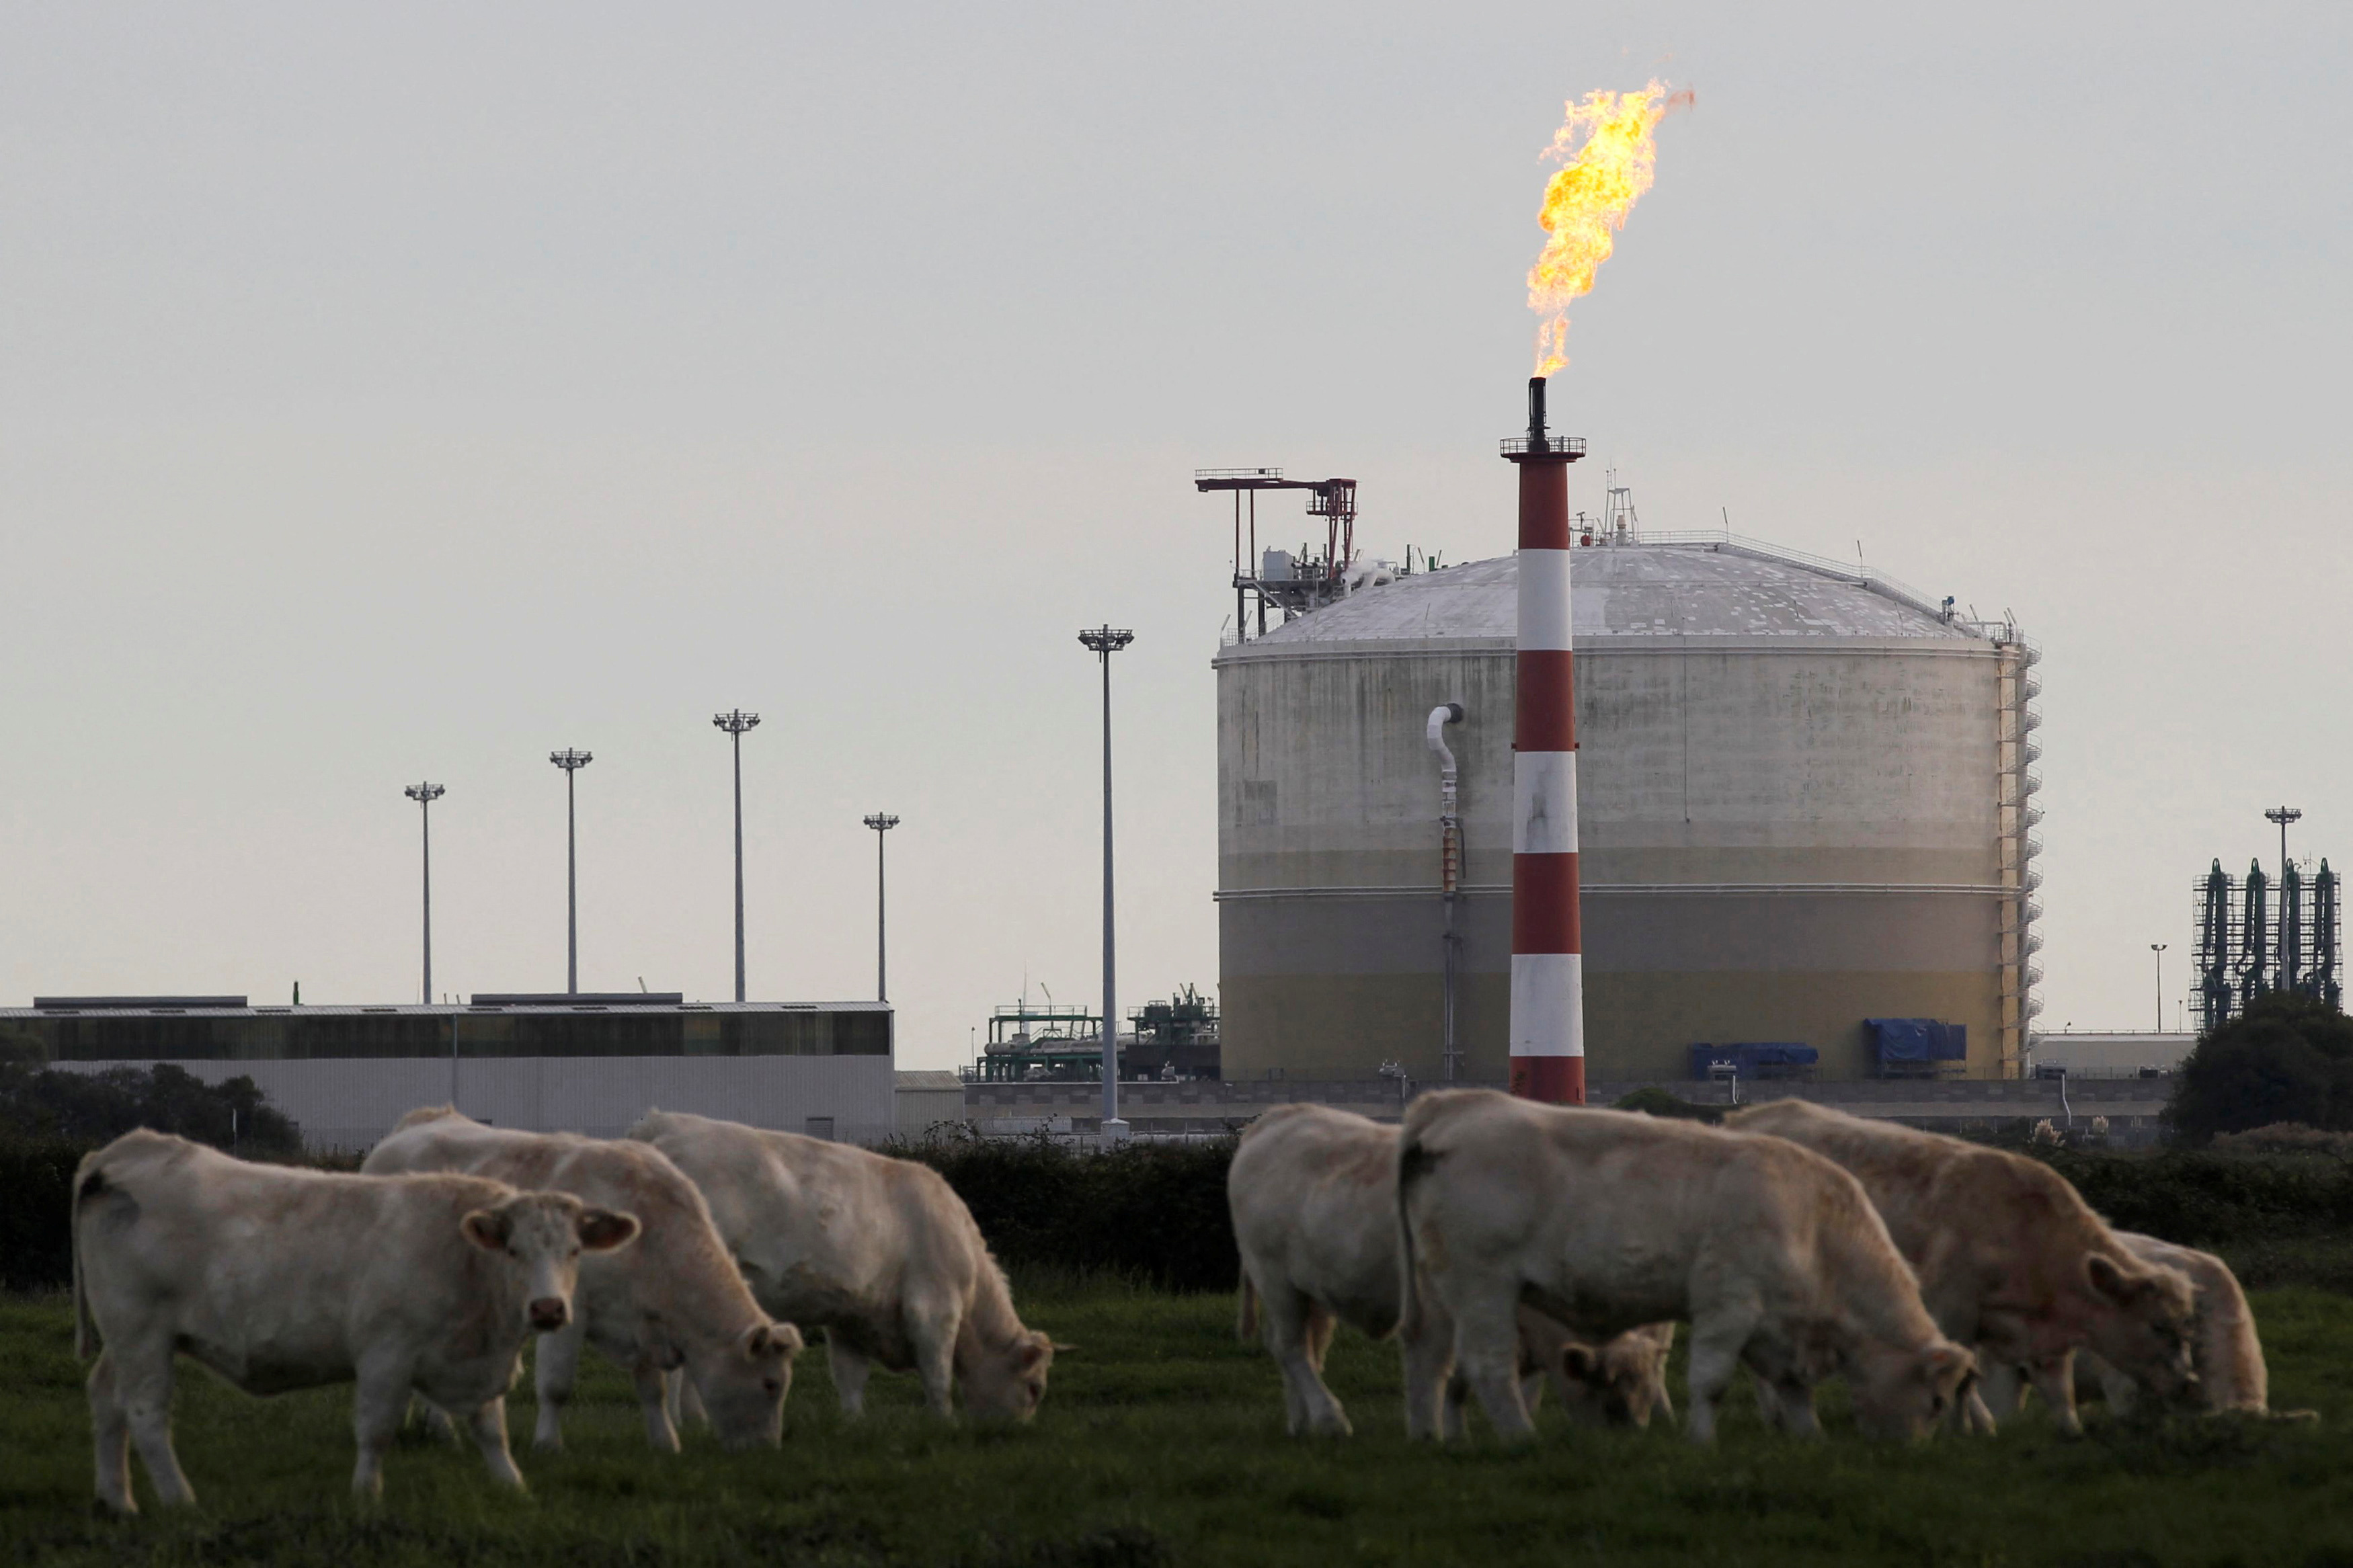 A flame burns methane gas to clean out pipelines at the empty terminal in Montoir-de-Bretagne